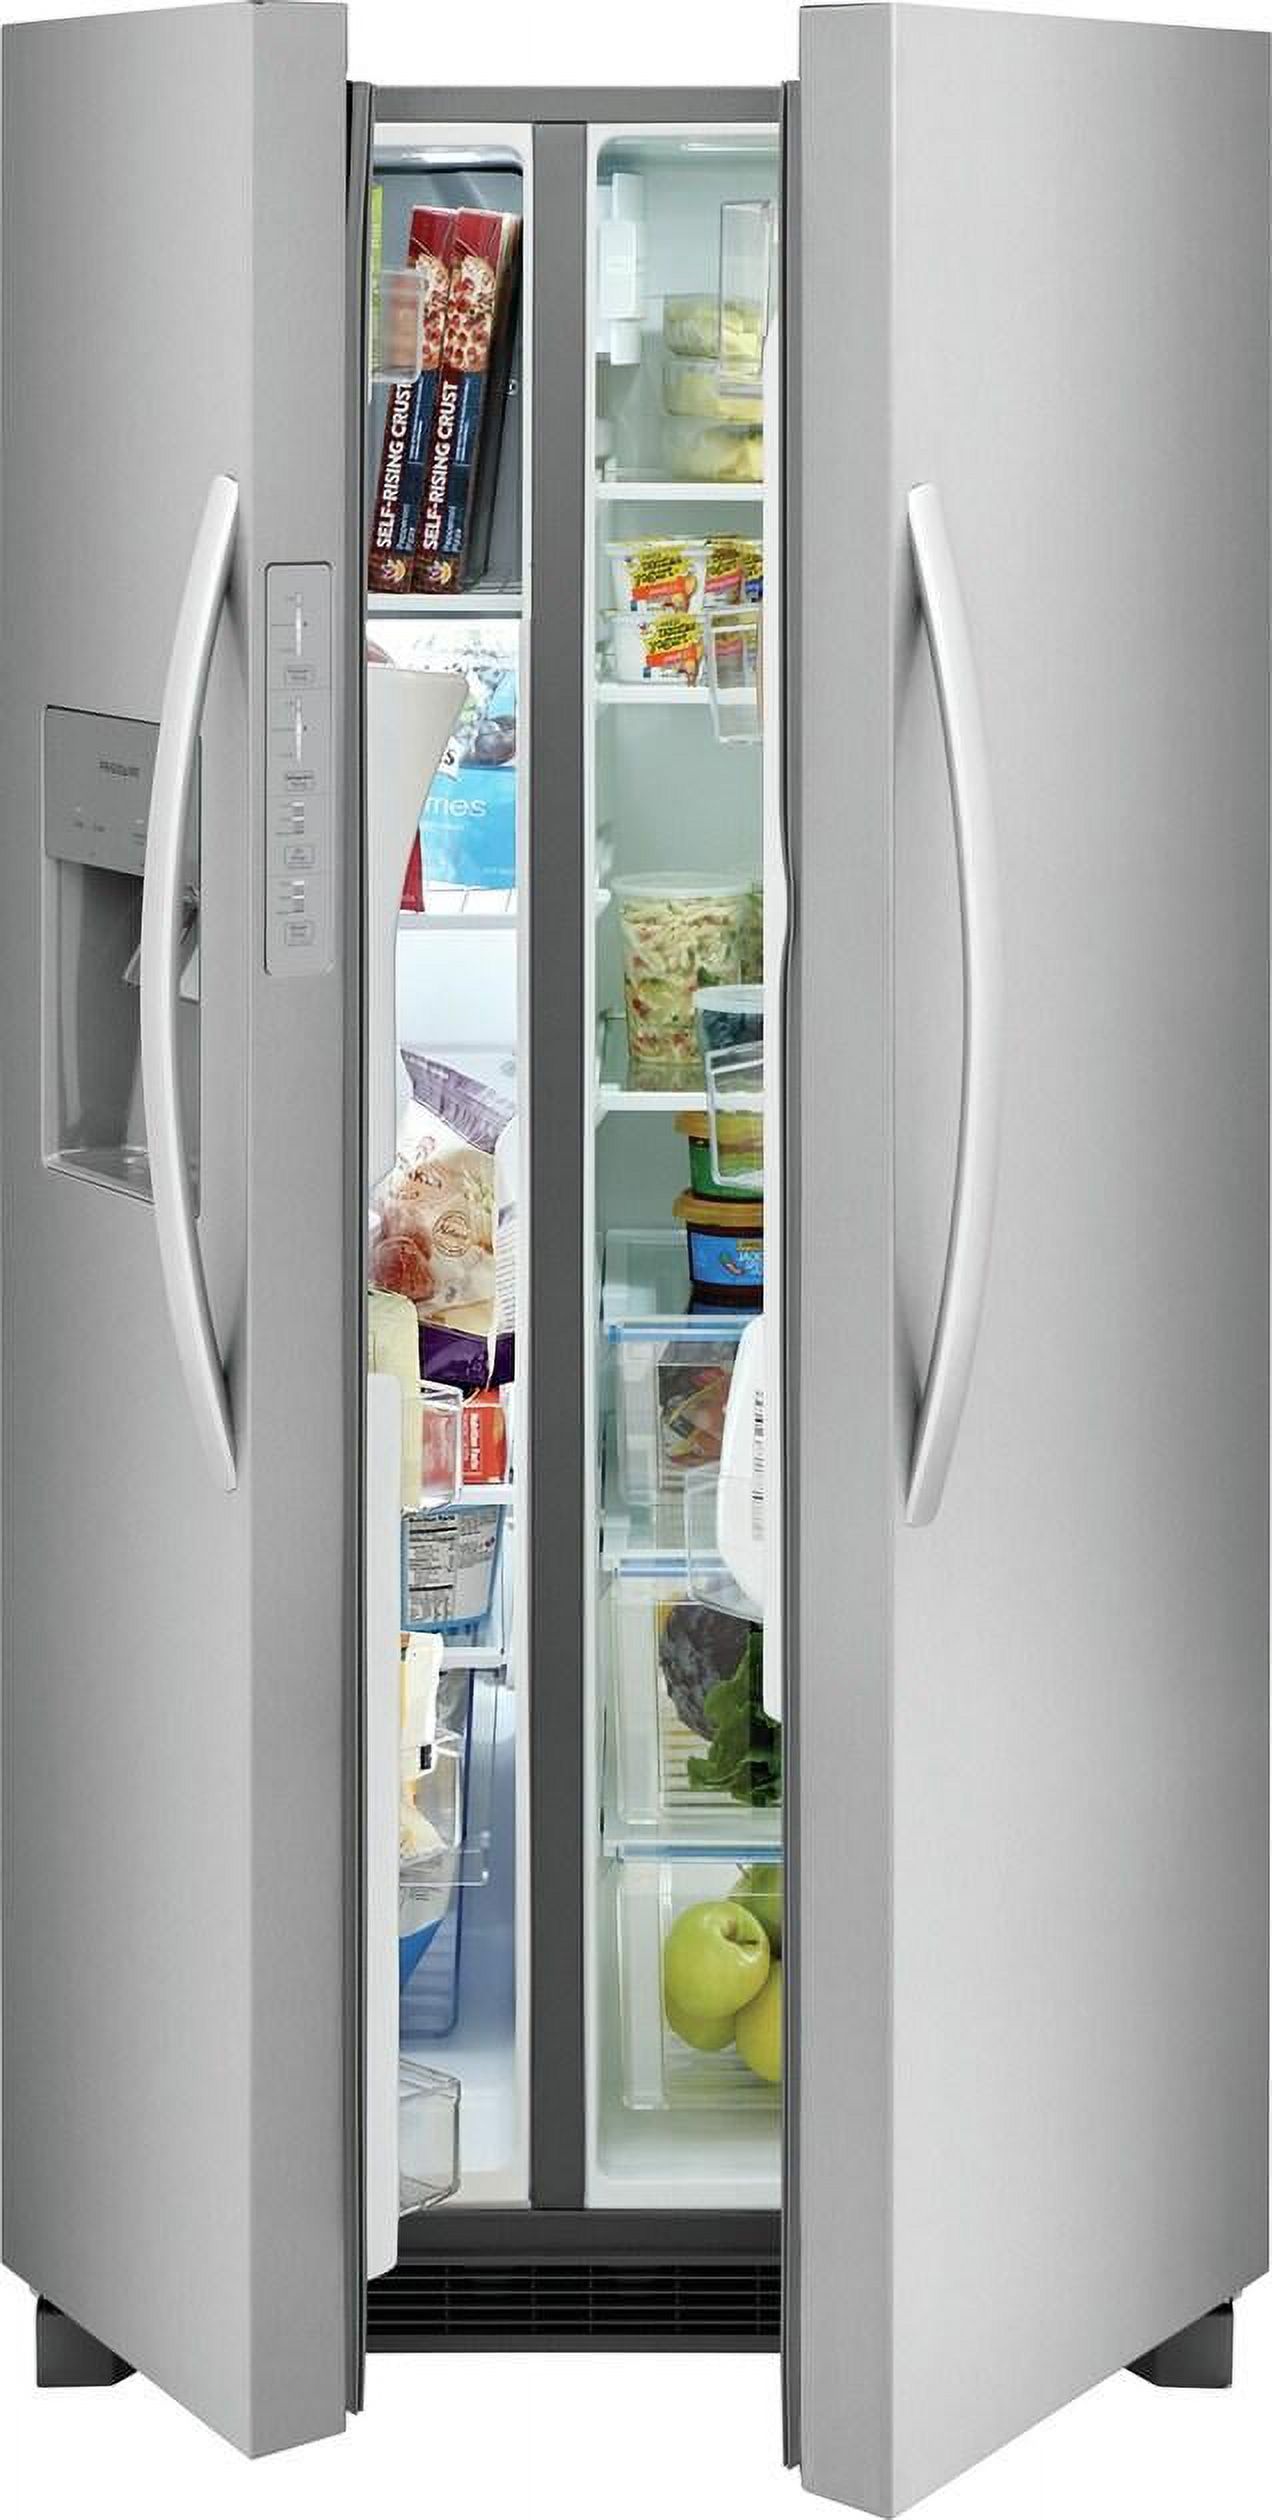 Frigidaire Frsc2333a 36" Wide 22.30 Cu. Ft. Side By Side Refrigerator - Stainless Steel - image 4 of 5